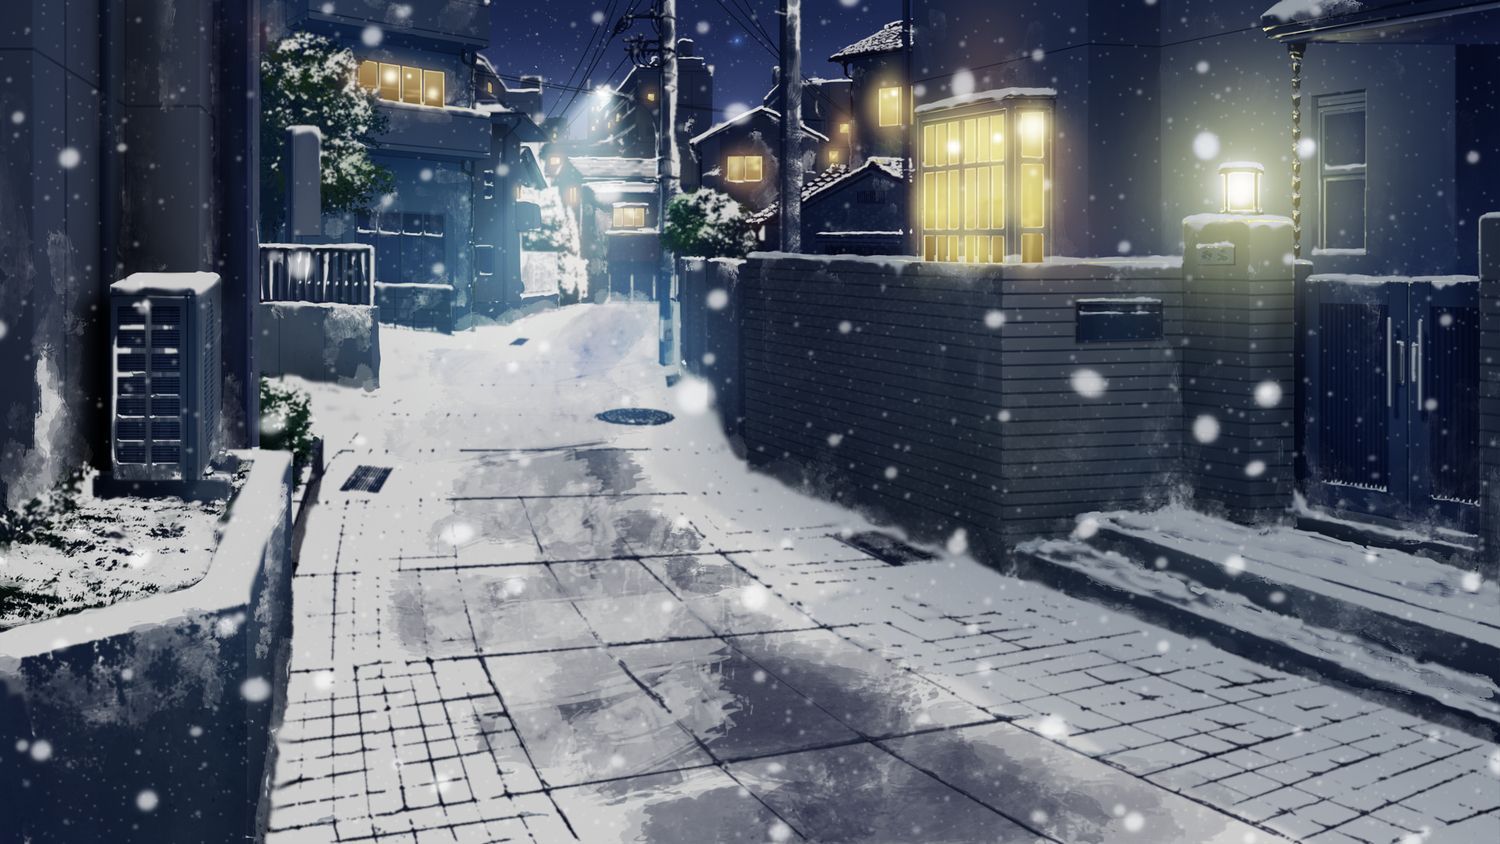 I've always wanted to walk down a street like this one with the one I love hand in hand on a snowy night one day